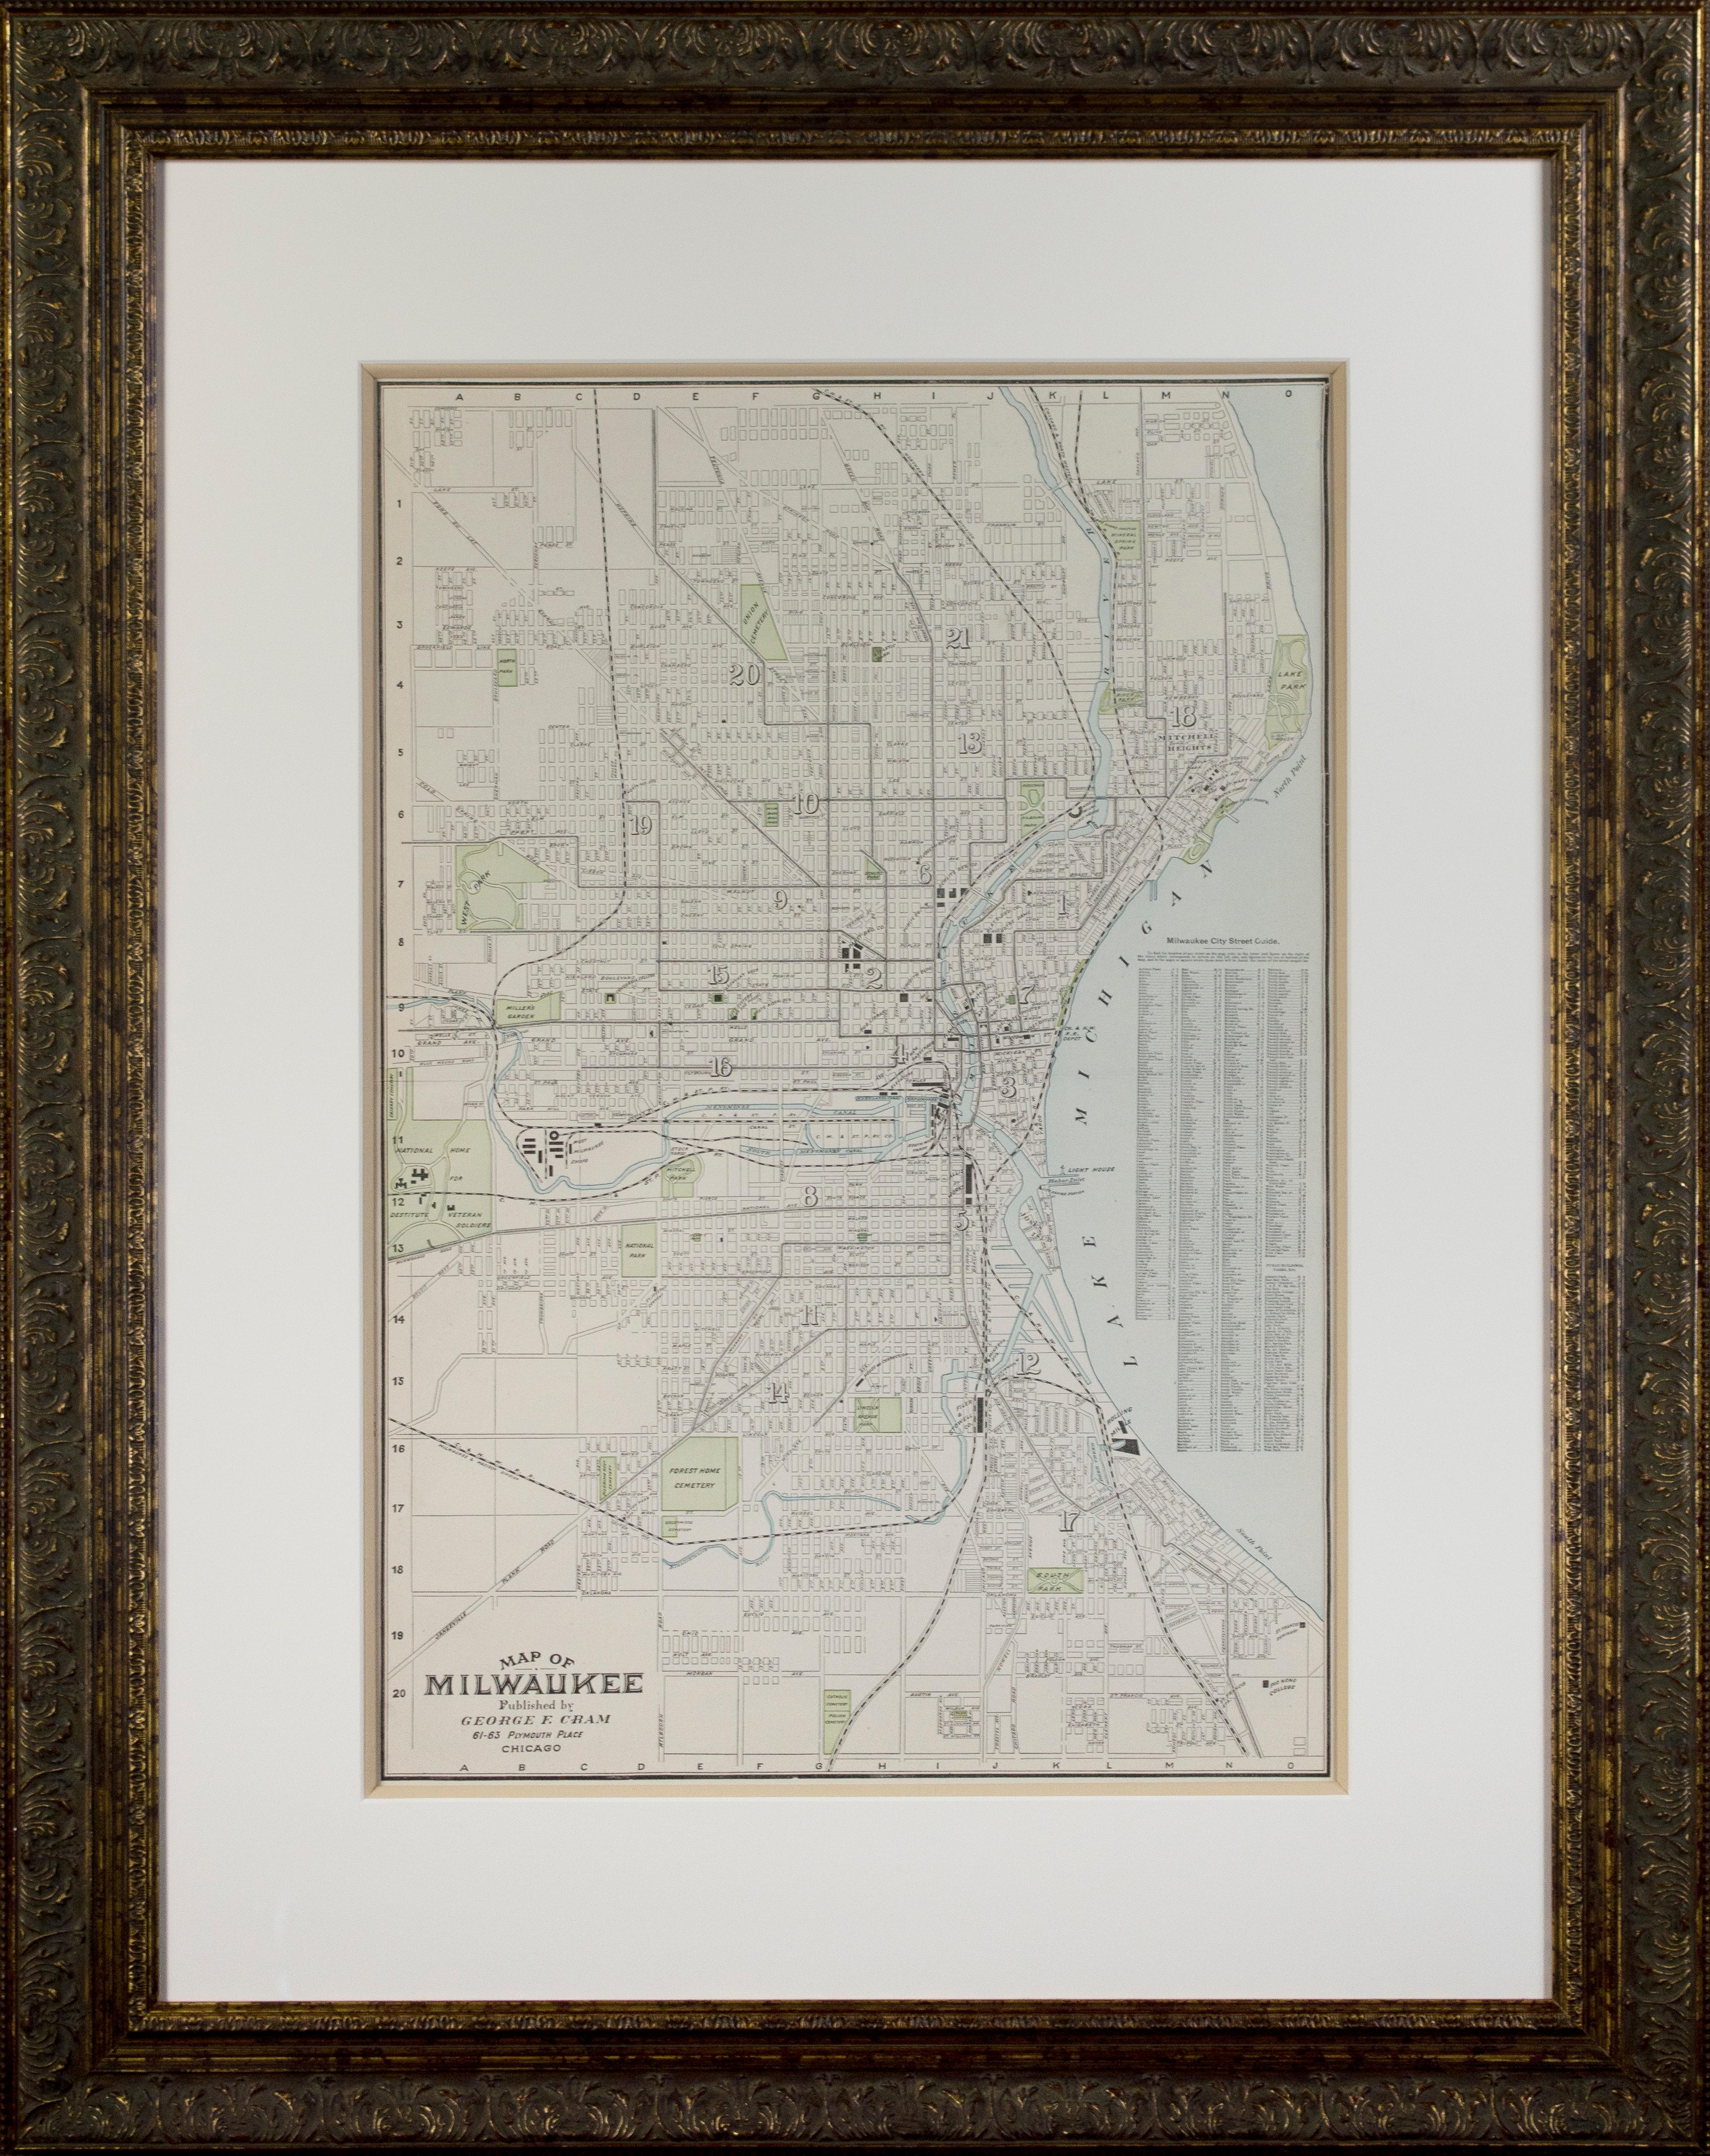 George Franklin Cram Print - 'Map of Milwaukee' color lithograph published by George F. Cram of Chicago